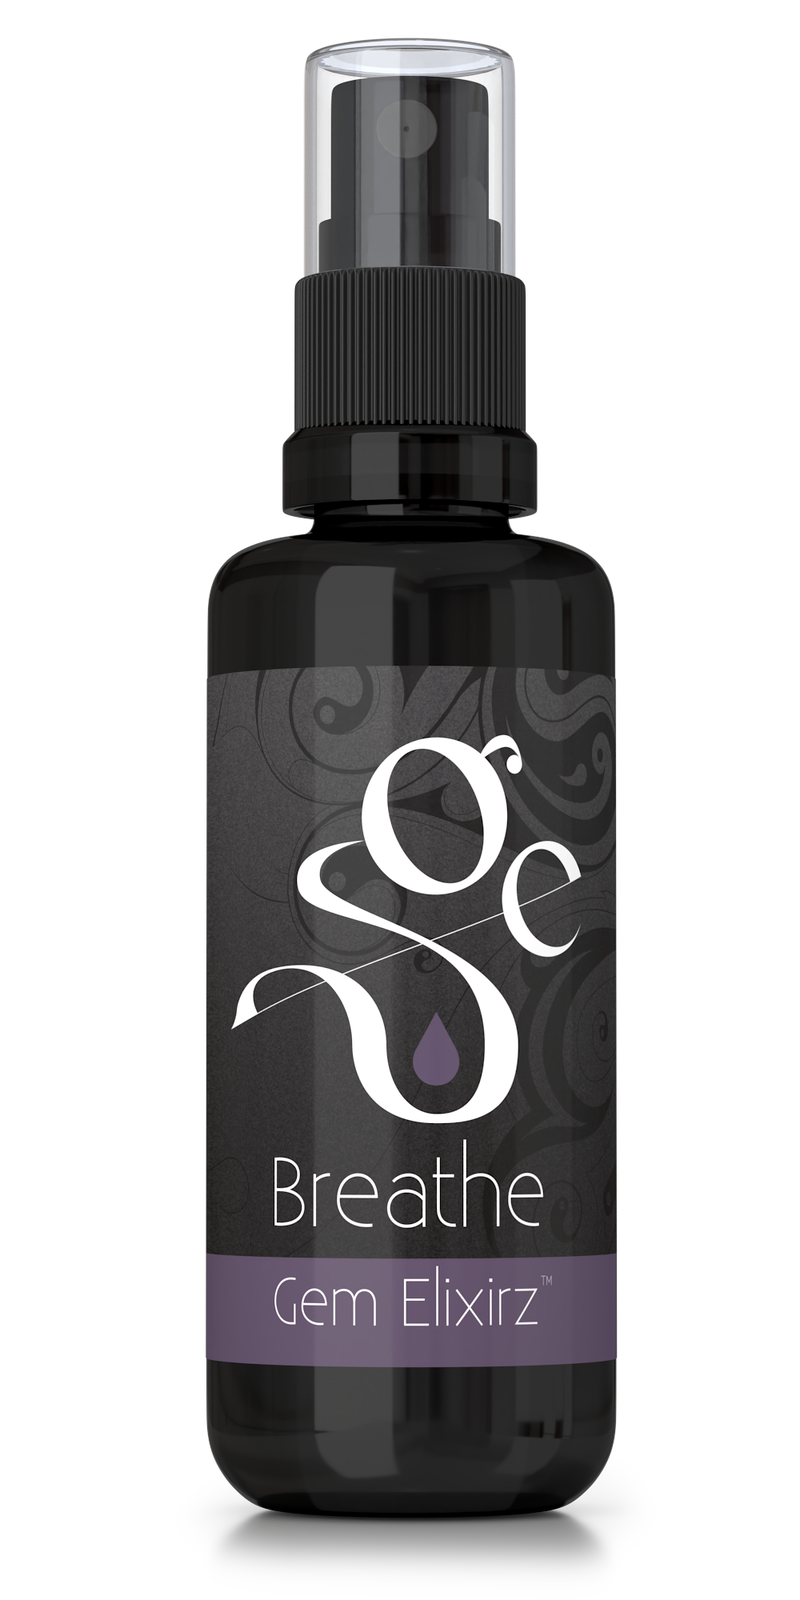 Breathe aromatherapy spray with essential oils and gemstones, frontside of bottle